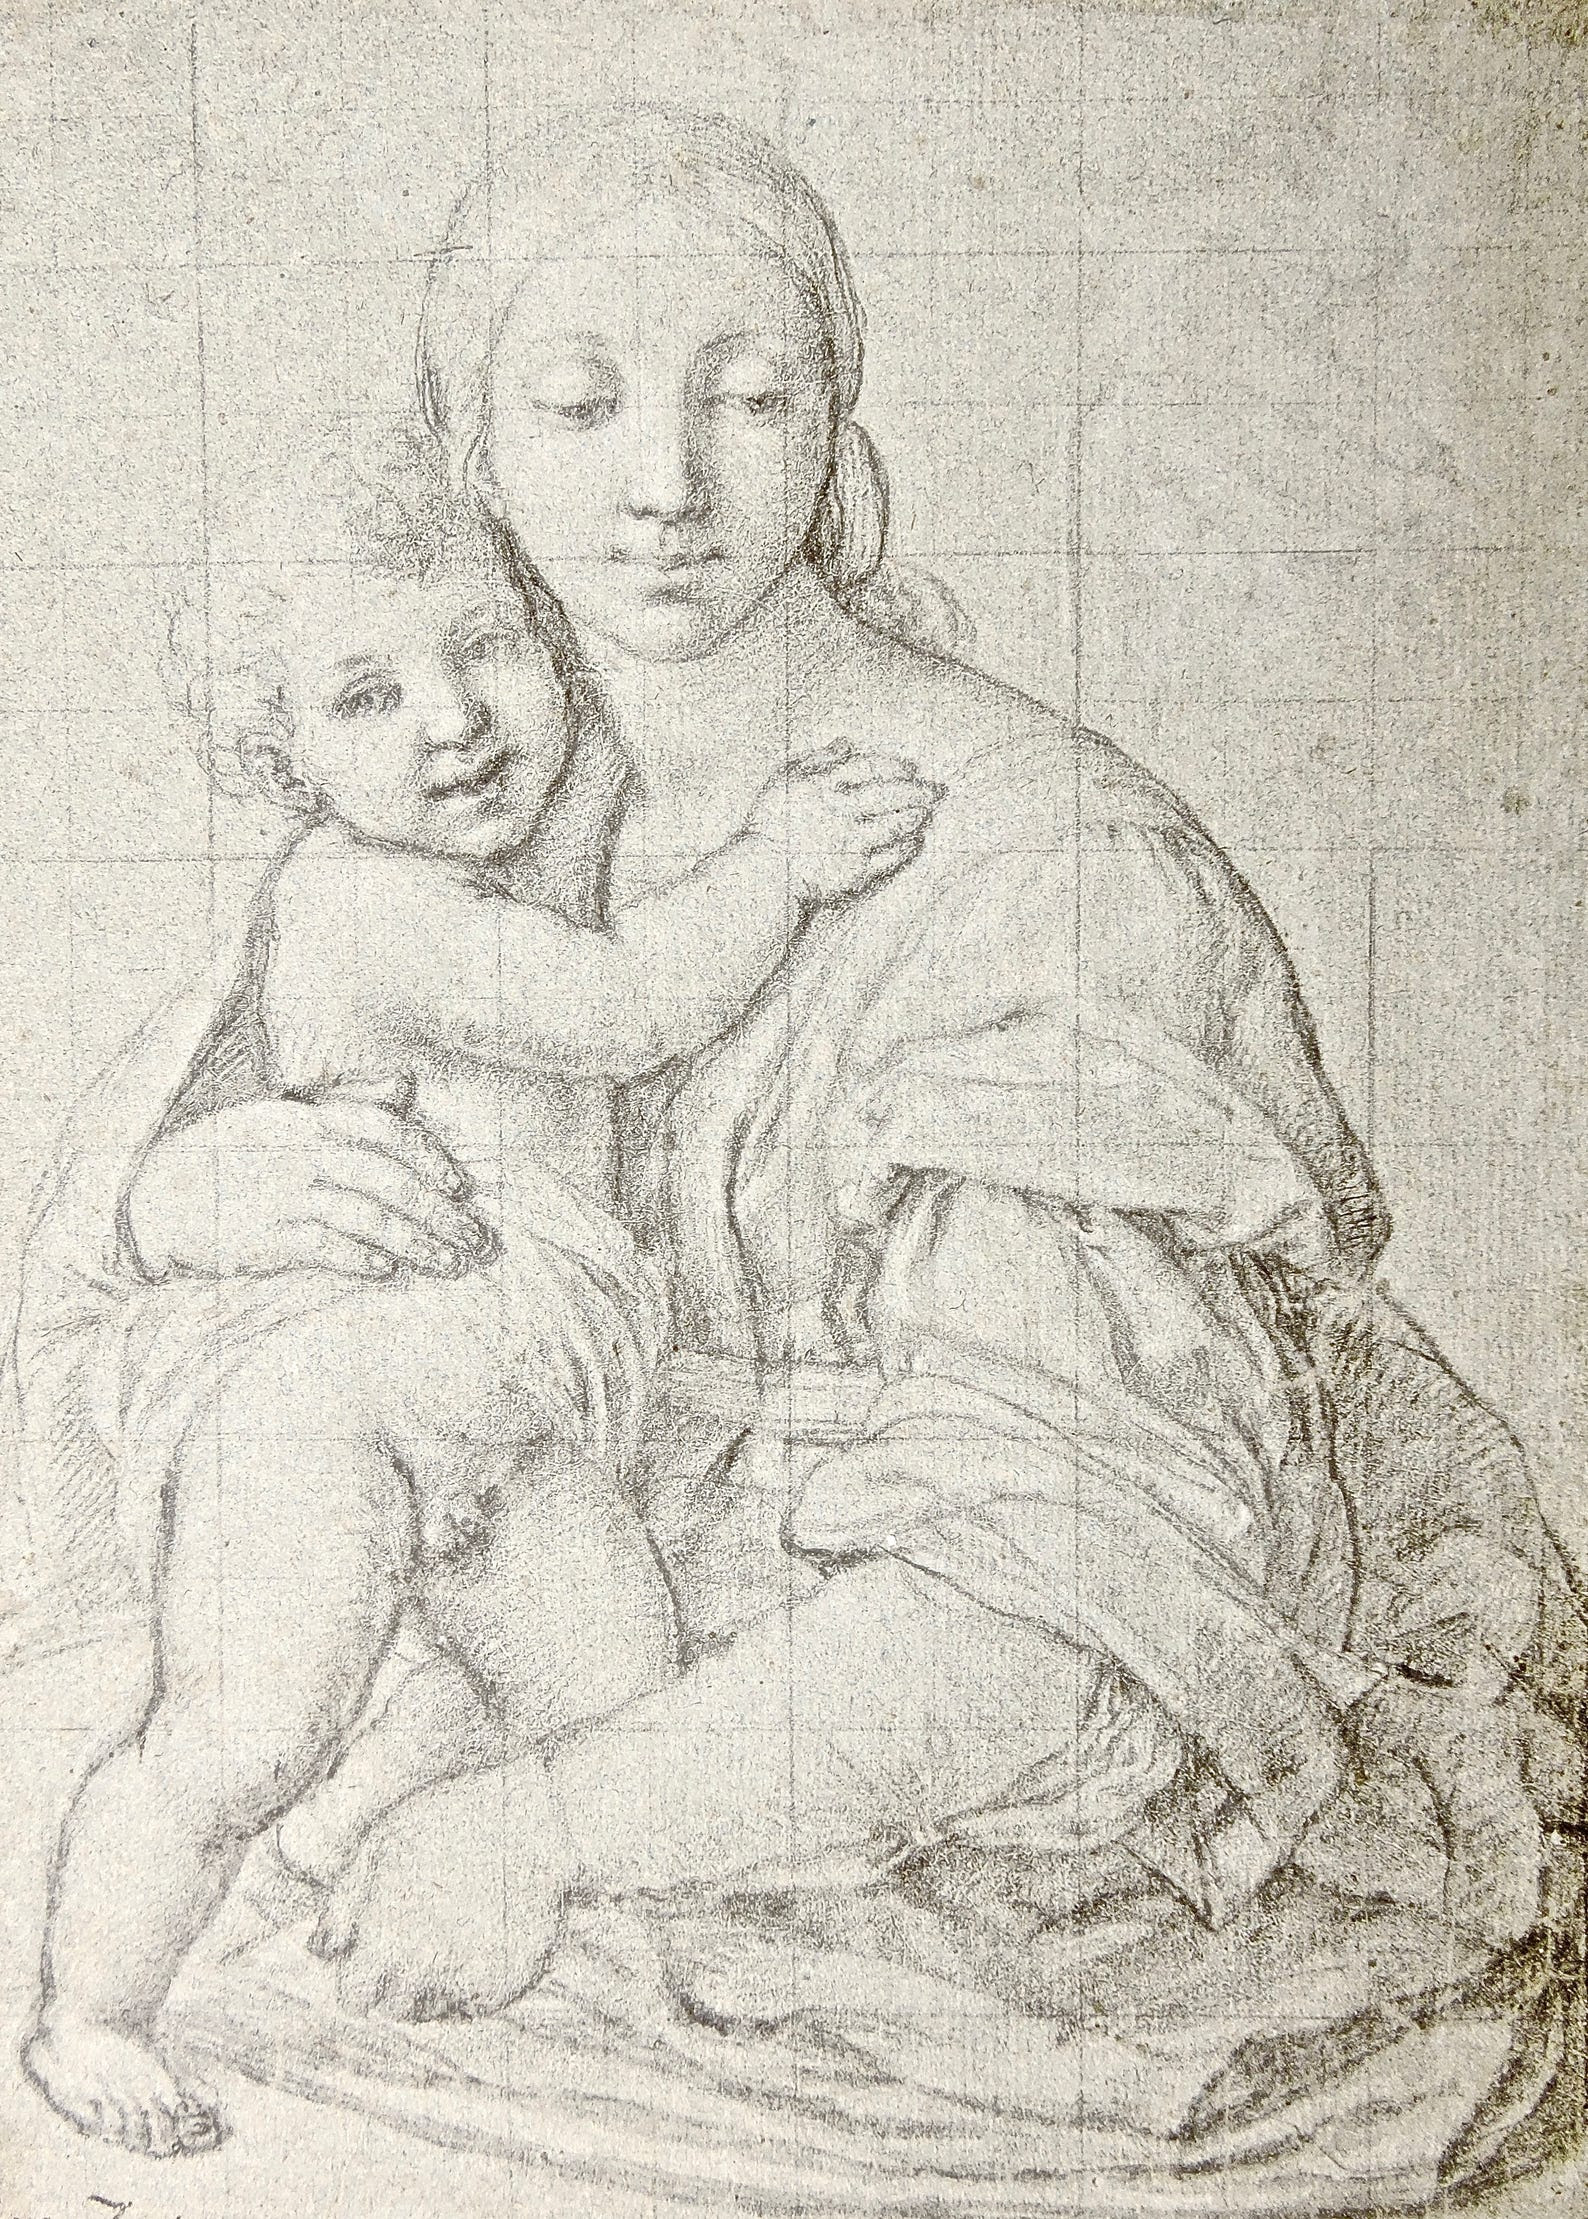 Study for Madonna and Child, ca. 1650 Pencil on blue paper, Giovanni Battista Salvi (called, “il Sassoferrato,” Italian, 1609‒1685). A gift of John and Sylvie O’Brien, this drawing is now in the collection of Washington County Museum of Fine Arts.